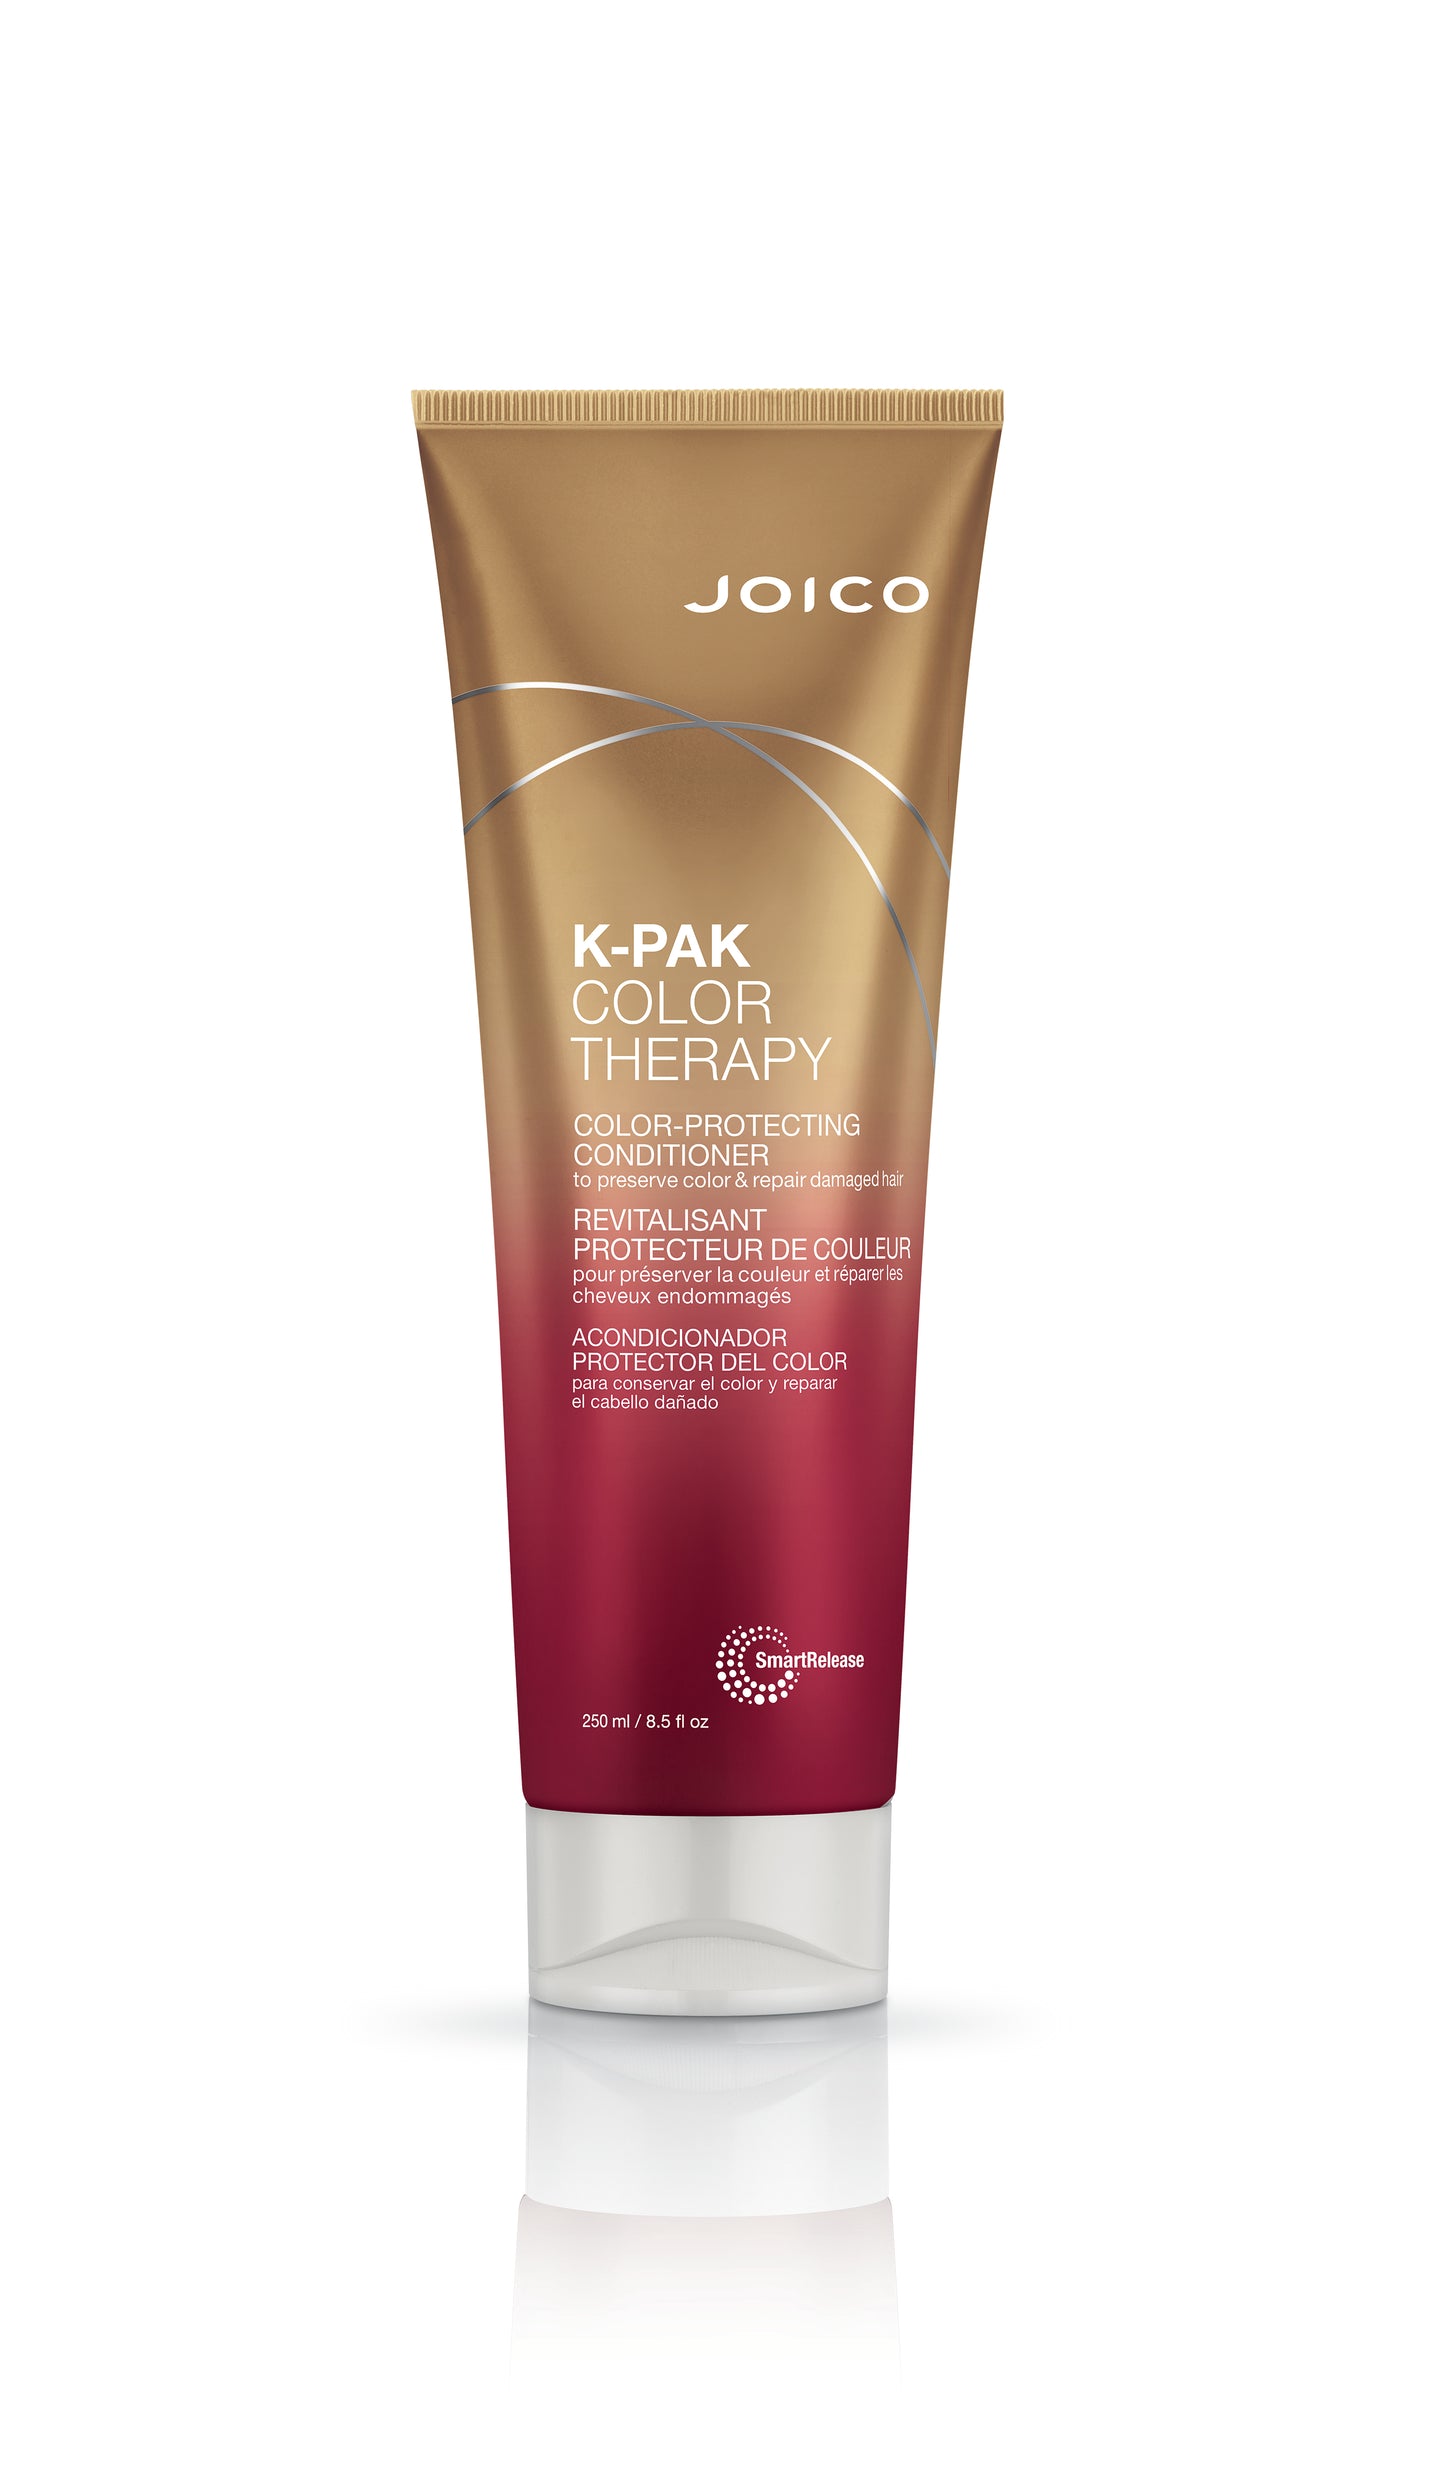 Joico K-PAK Color Therapy Luster Lock 250ml treatment